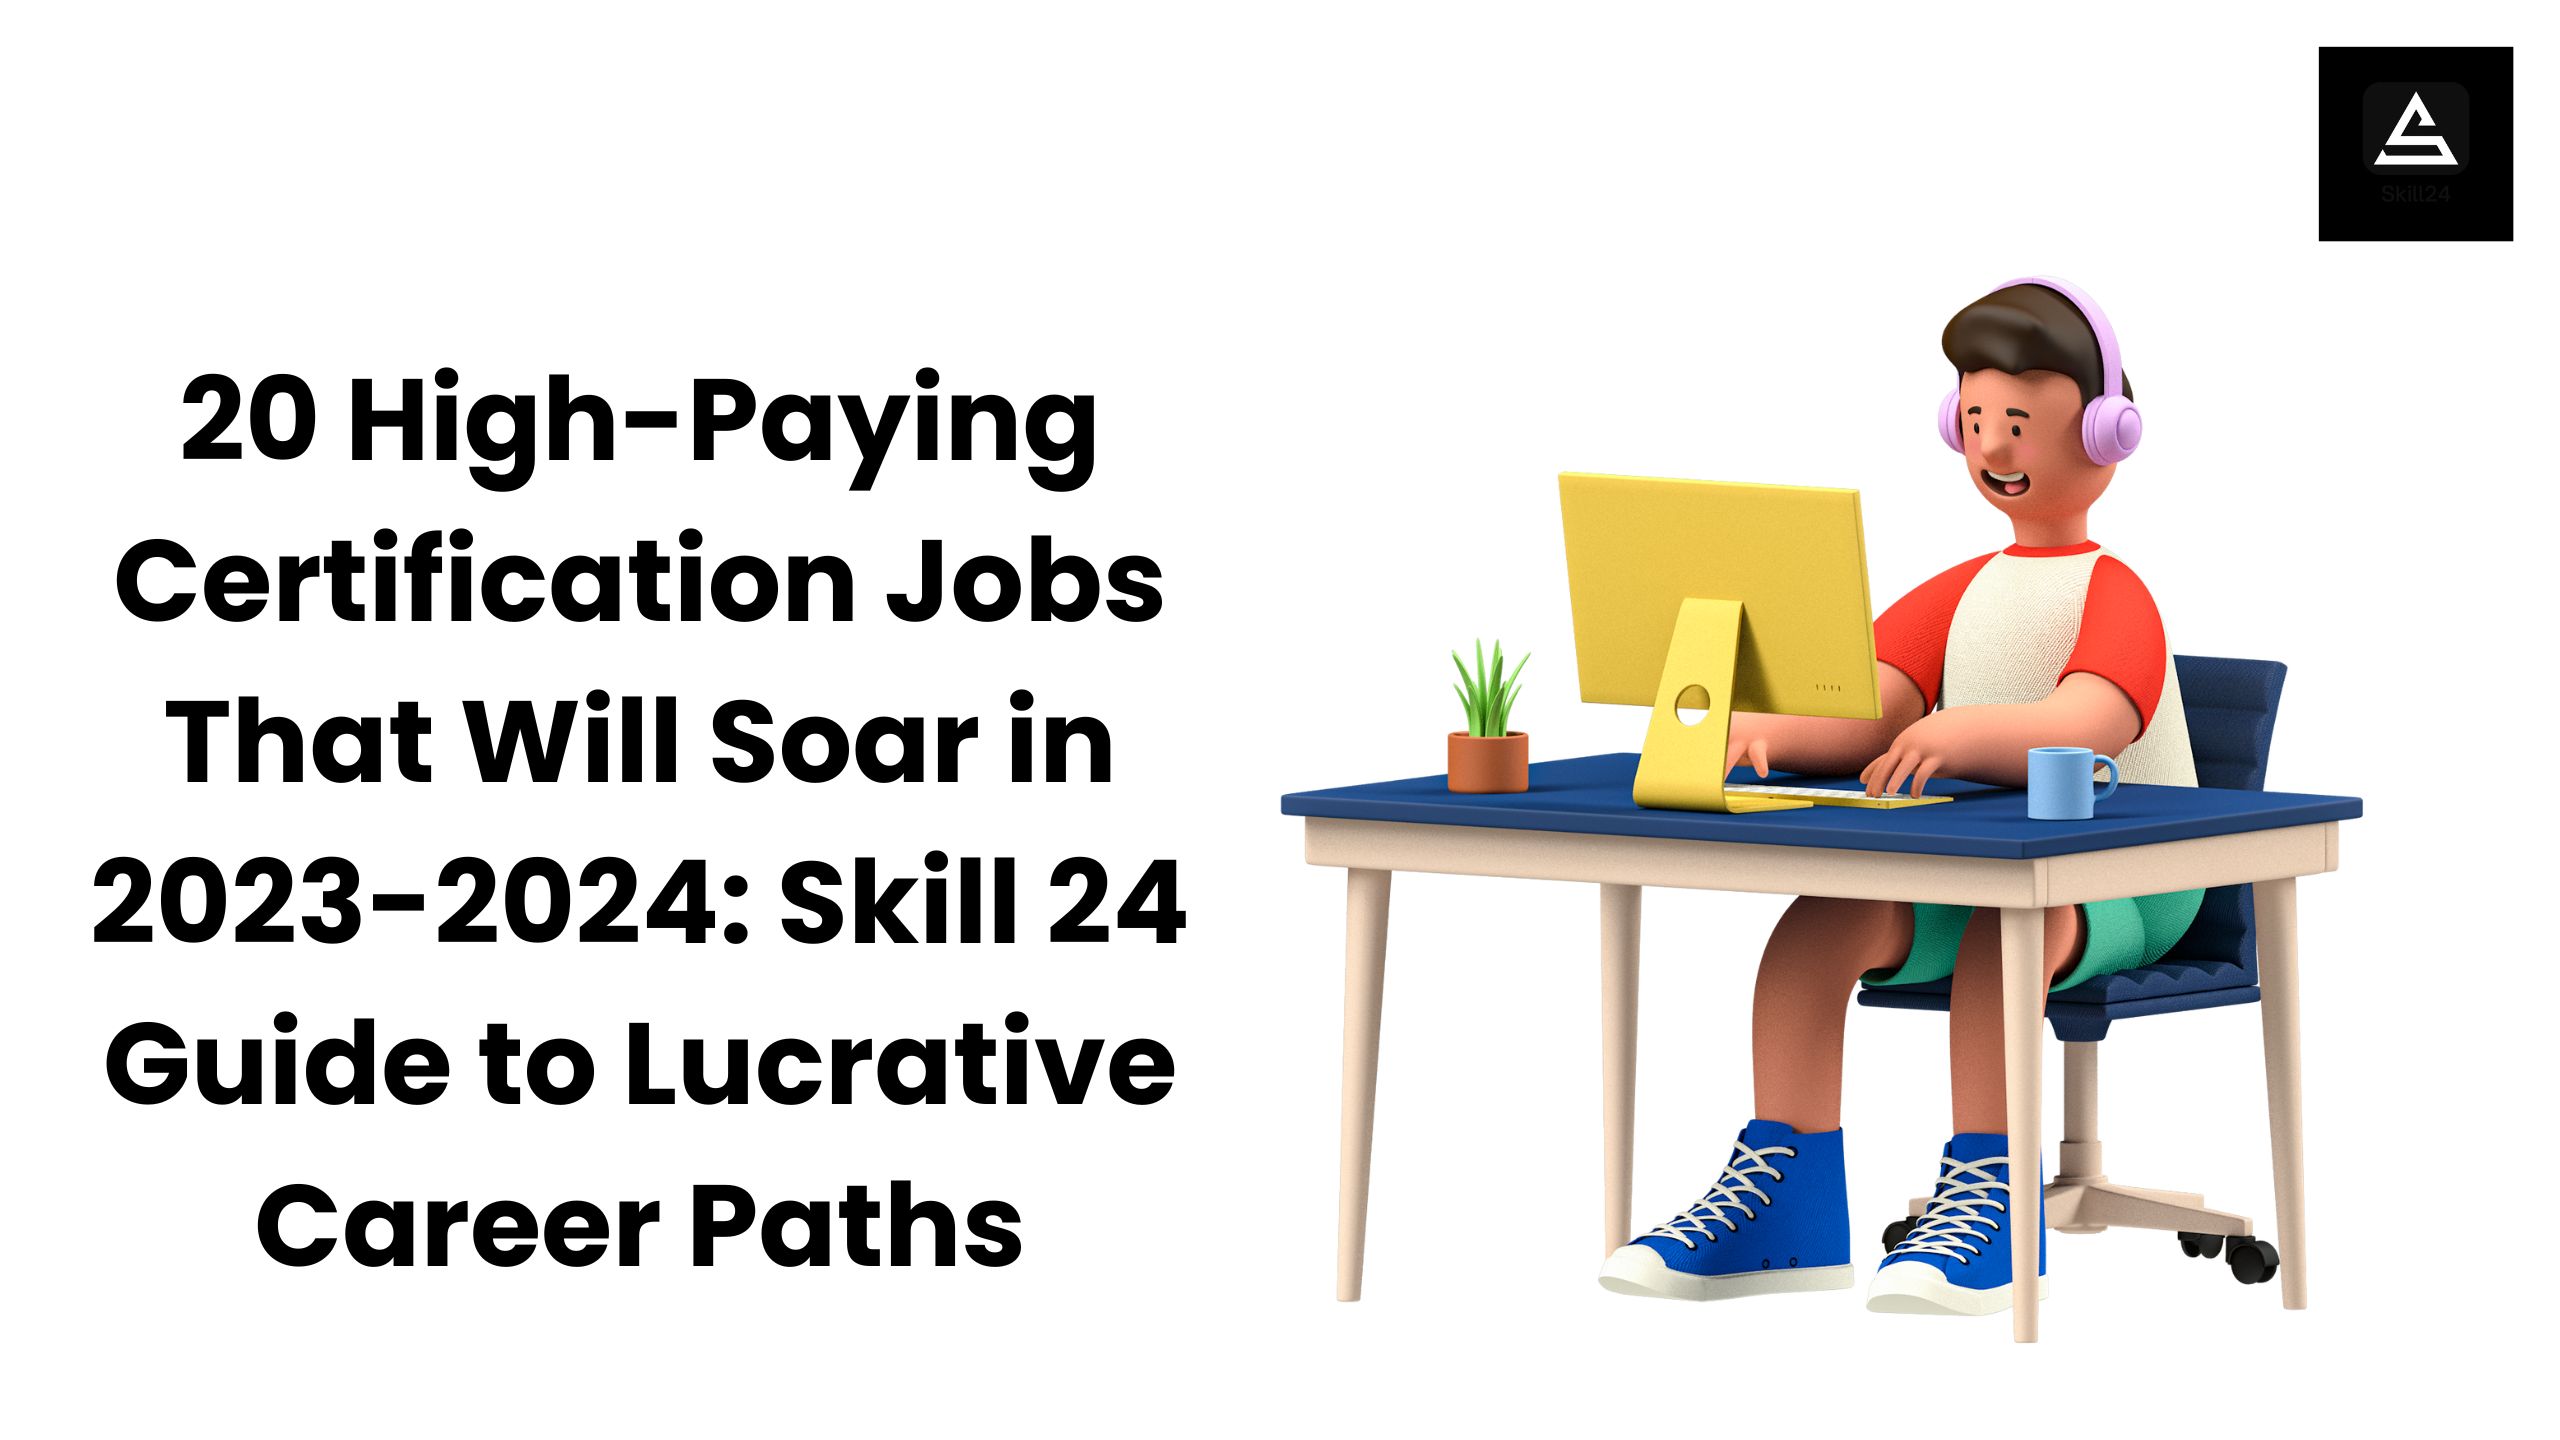 20 High-Paying Certification Jobs That Will Soar in 2023-2024: Skill 24 Guide to Lucrative Career Paths